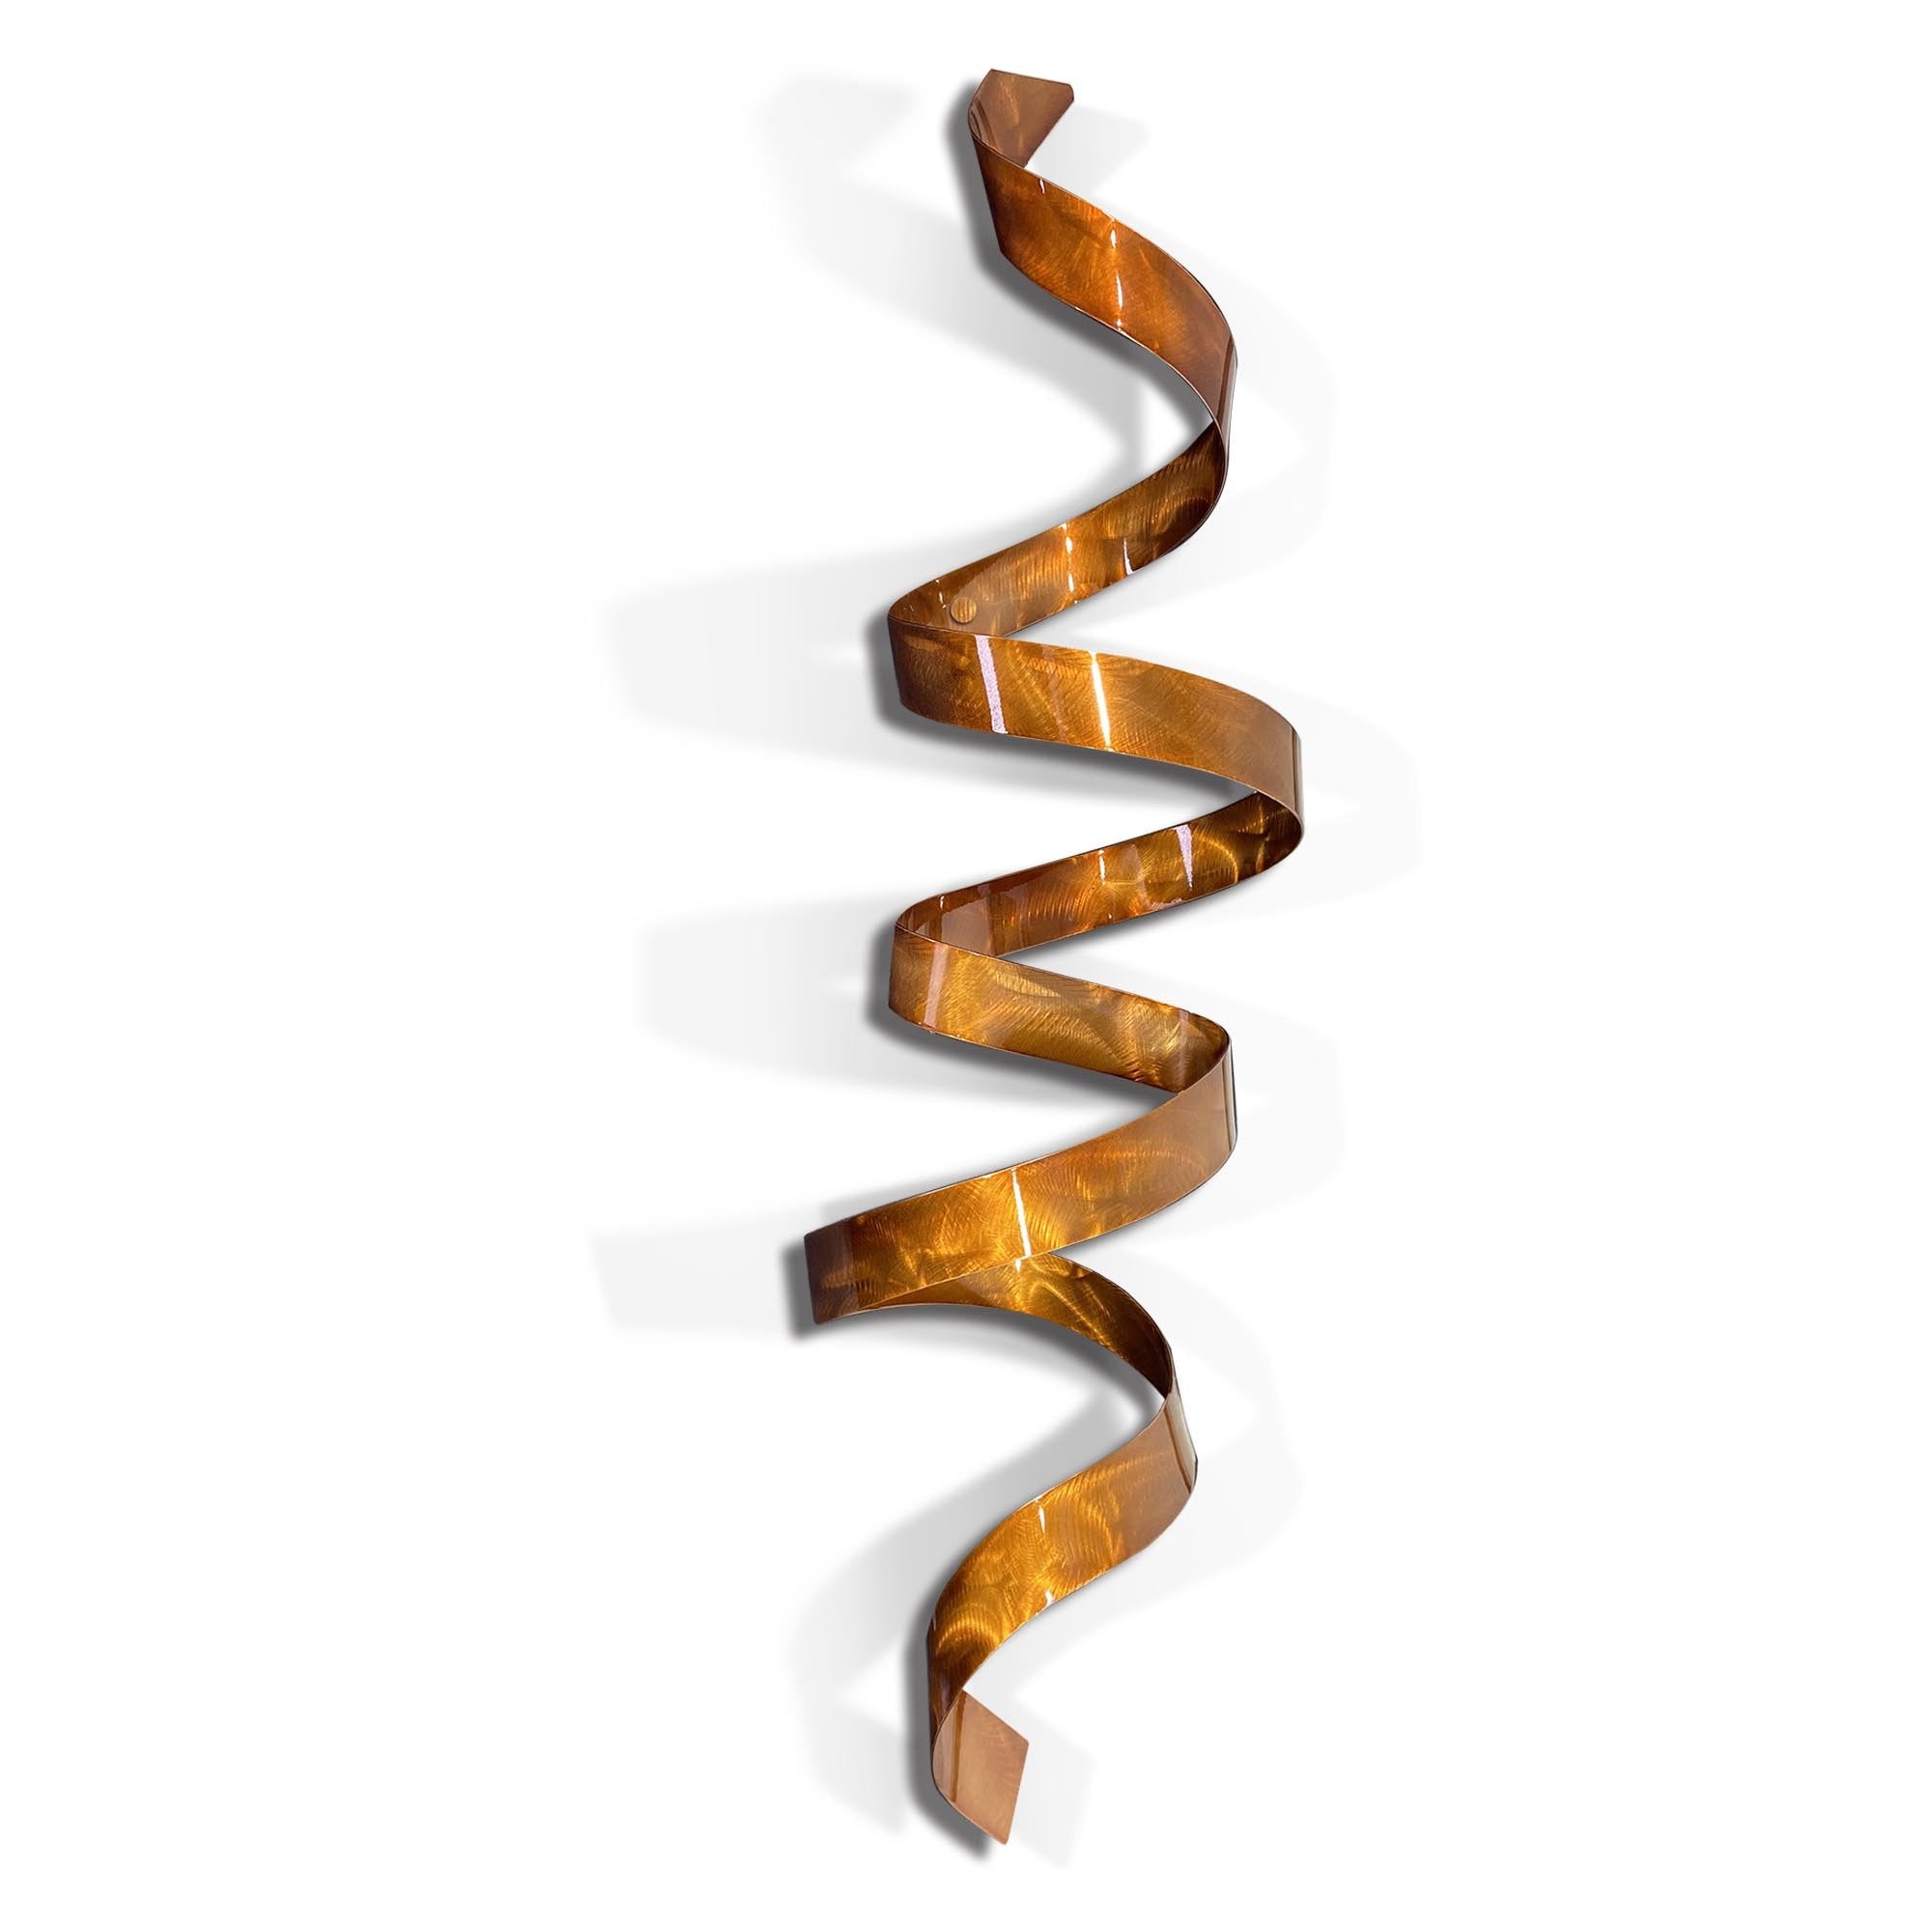 At Auction: 3PC PAINTED COPPER ALUMINUM METAL RIBBON WALL SCULPTURES.  TWISTED RIBBON FORMS. TRIPTYCH.